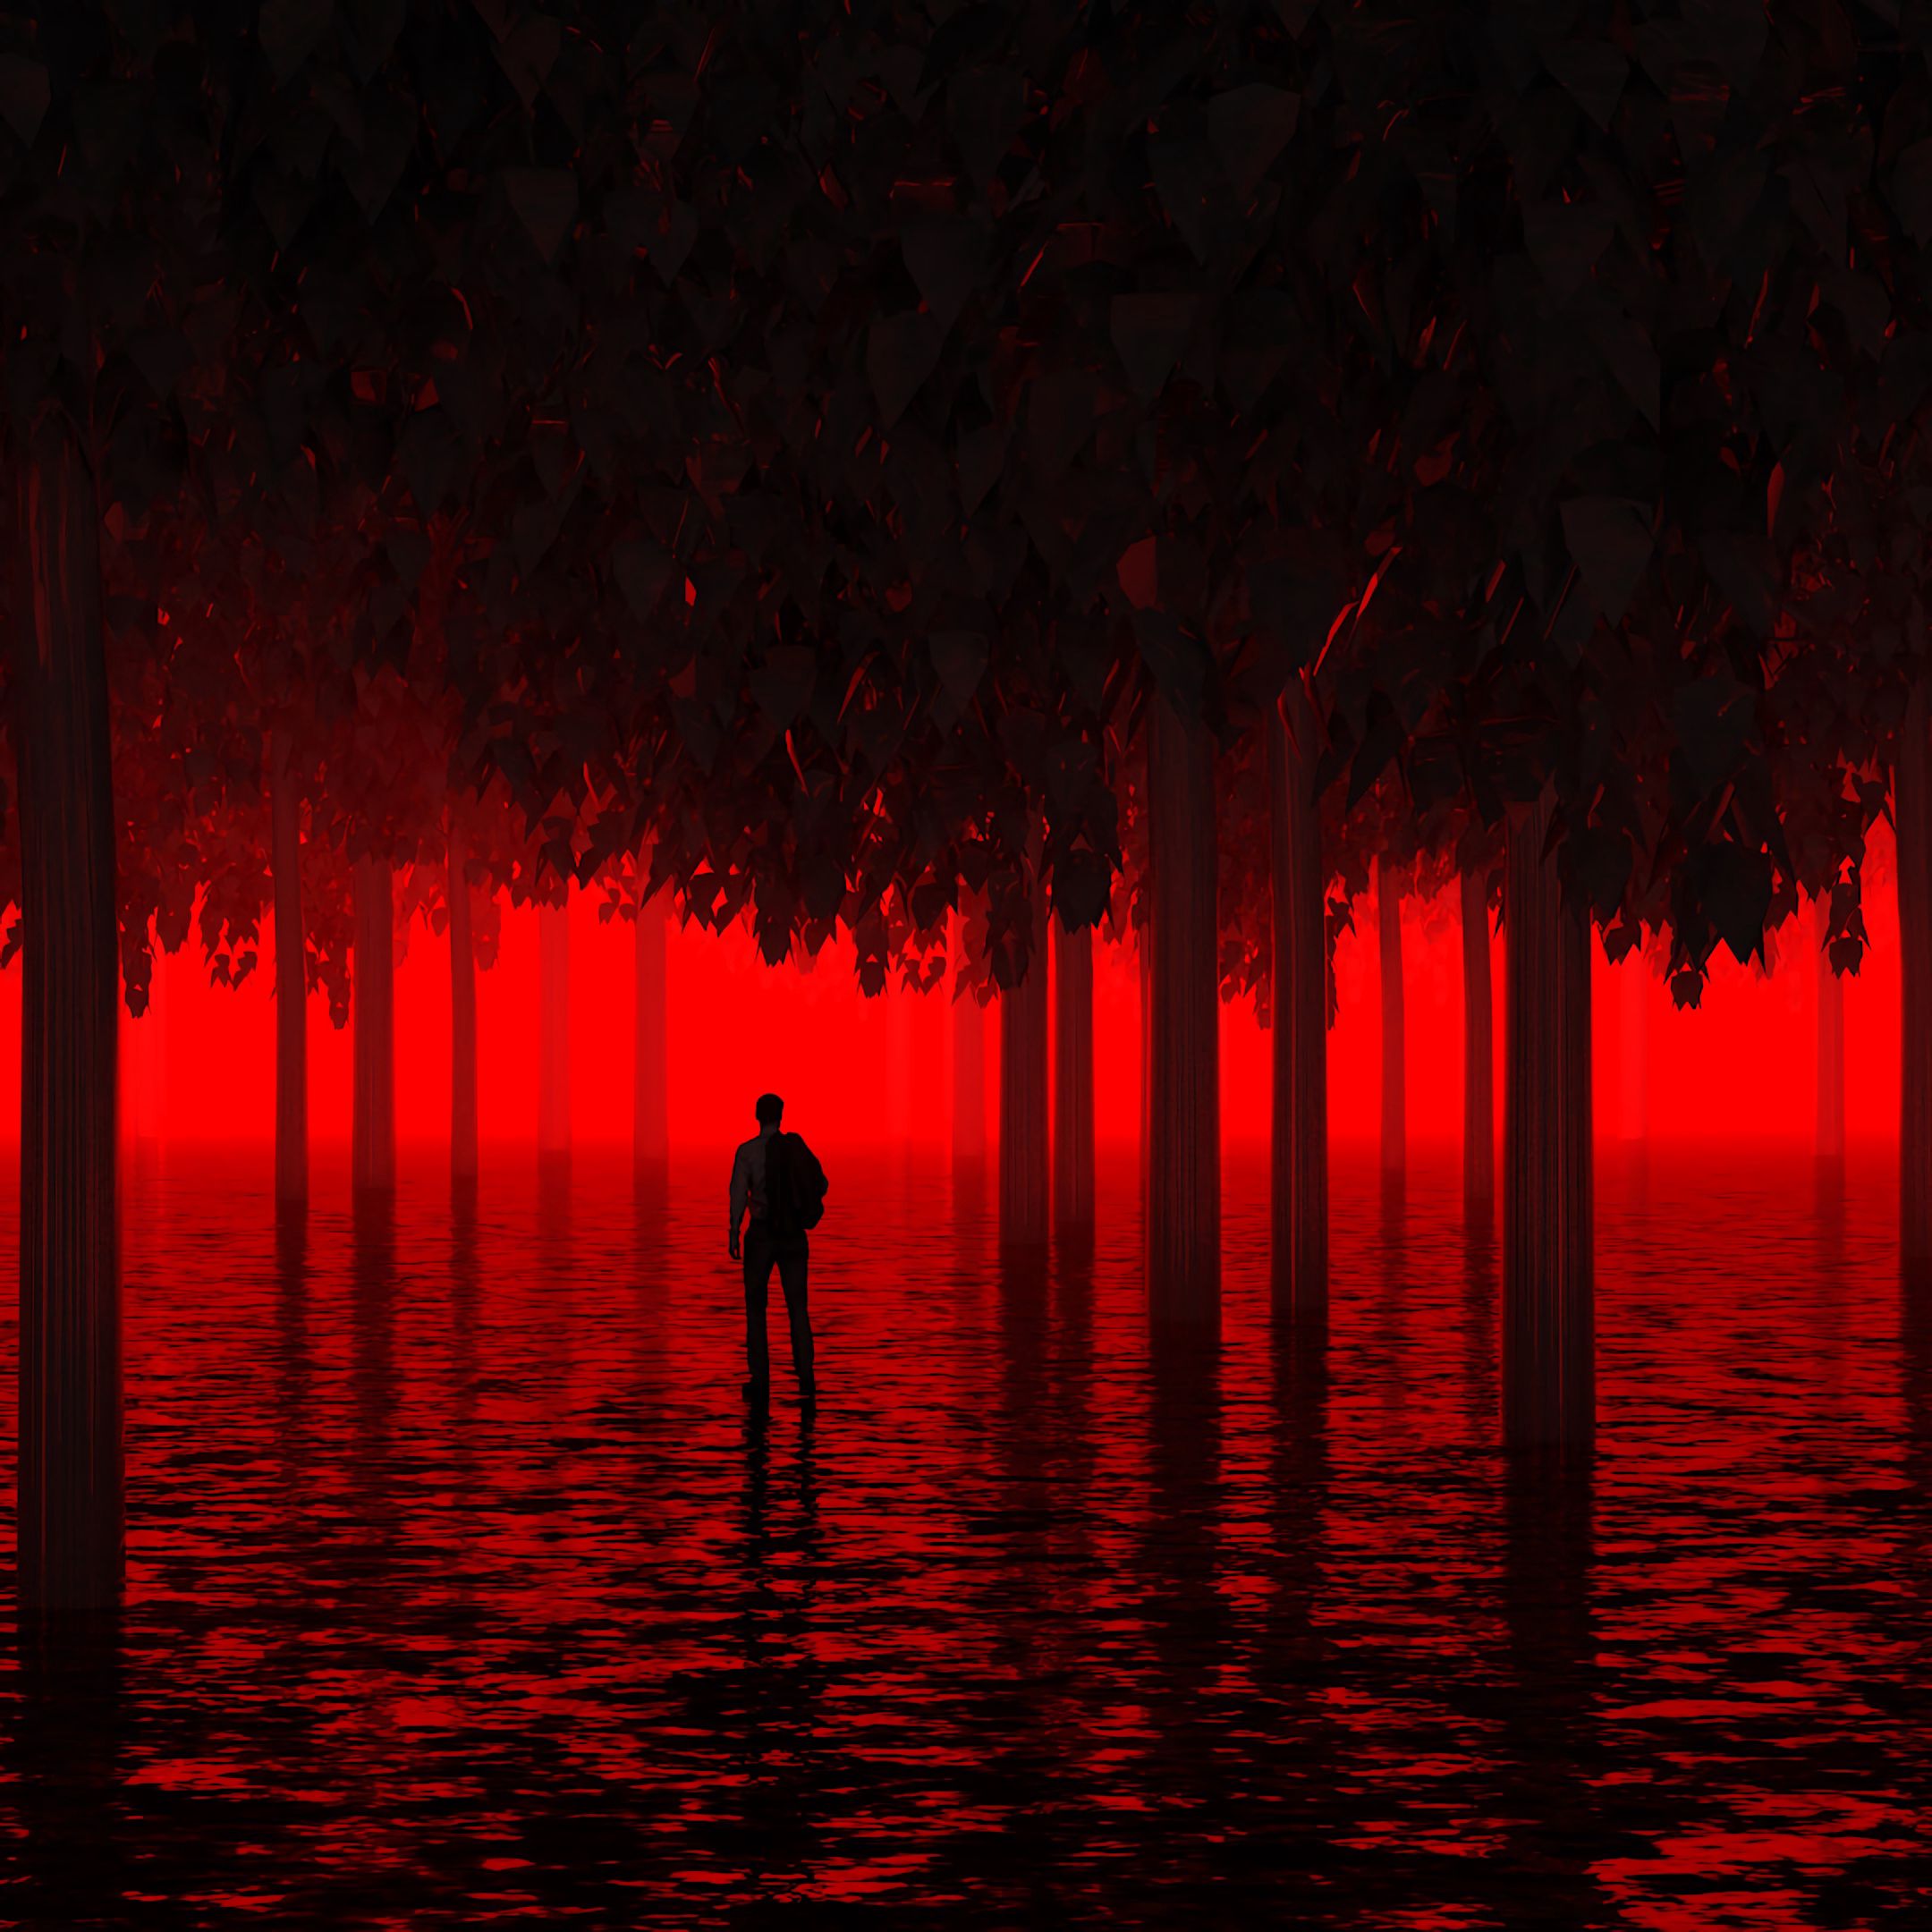 light, neon, human, dark, water, trees, red, shine, person, flooded, submerged lock screen backgrounds